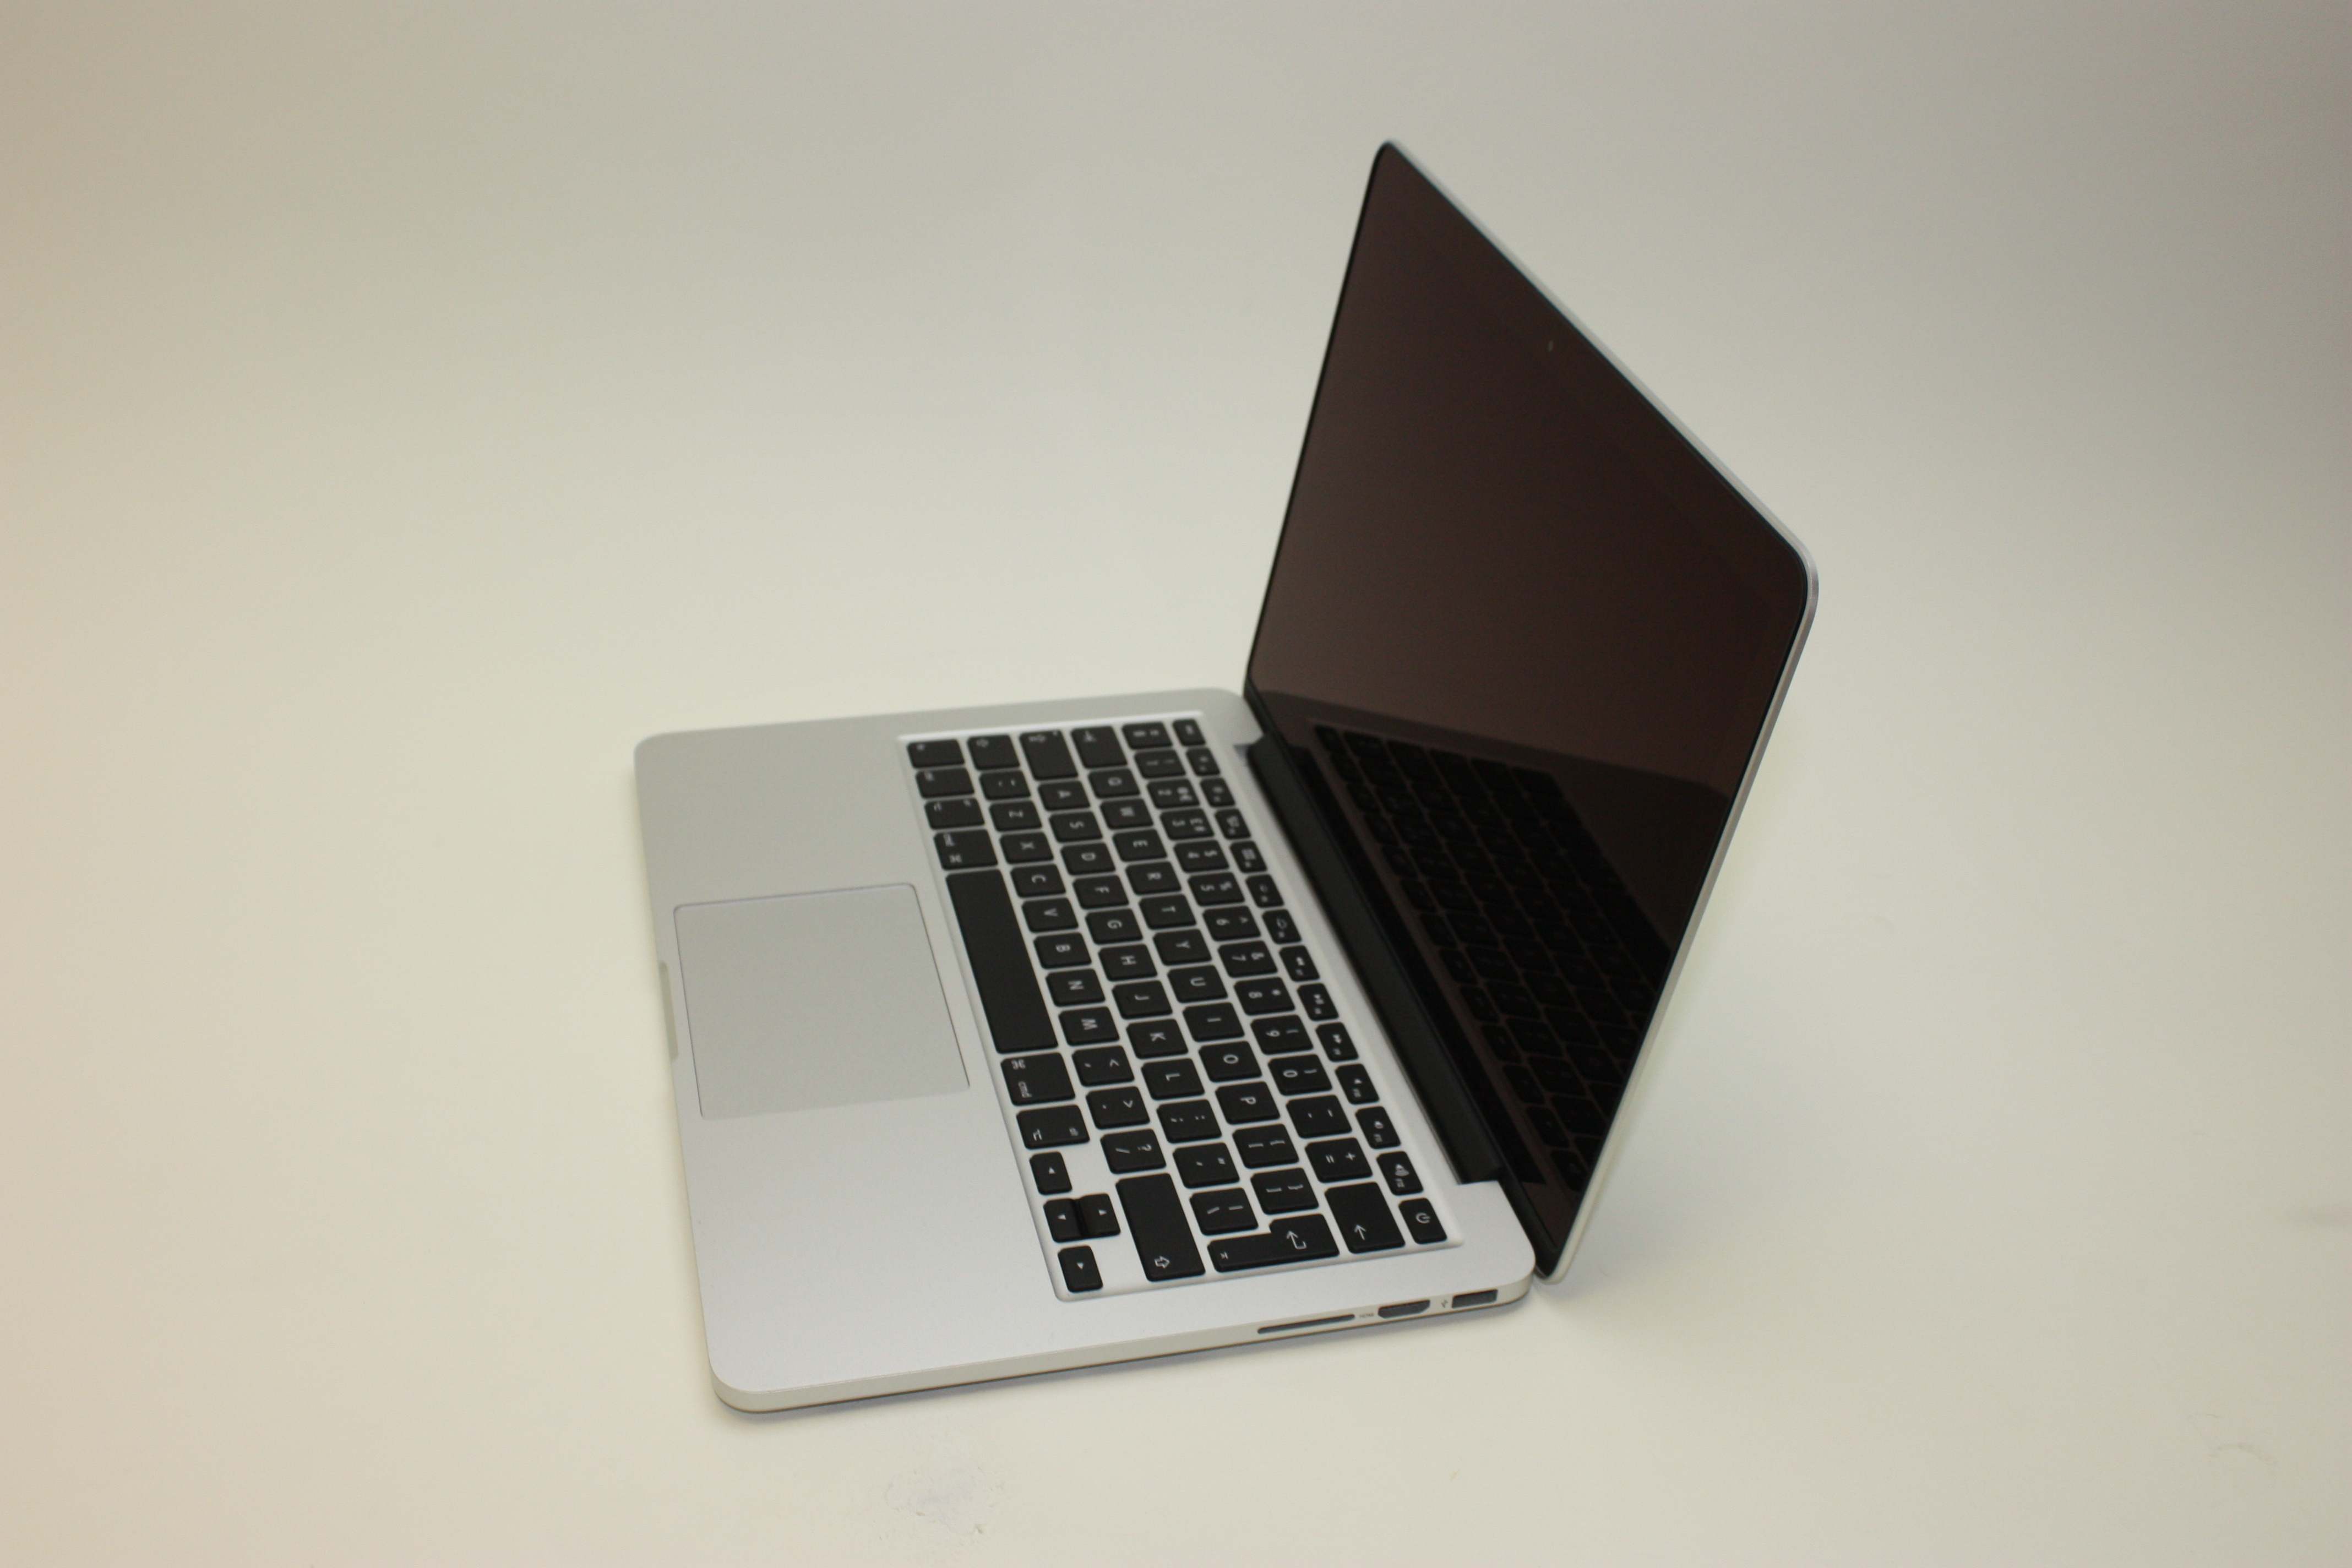 MacBook Pro Retina 13" | mResell | Good Condition and Free Delivery